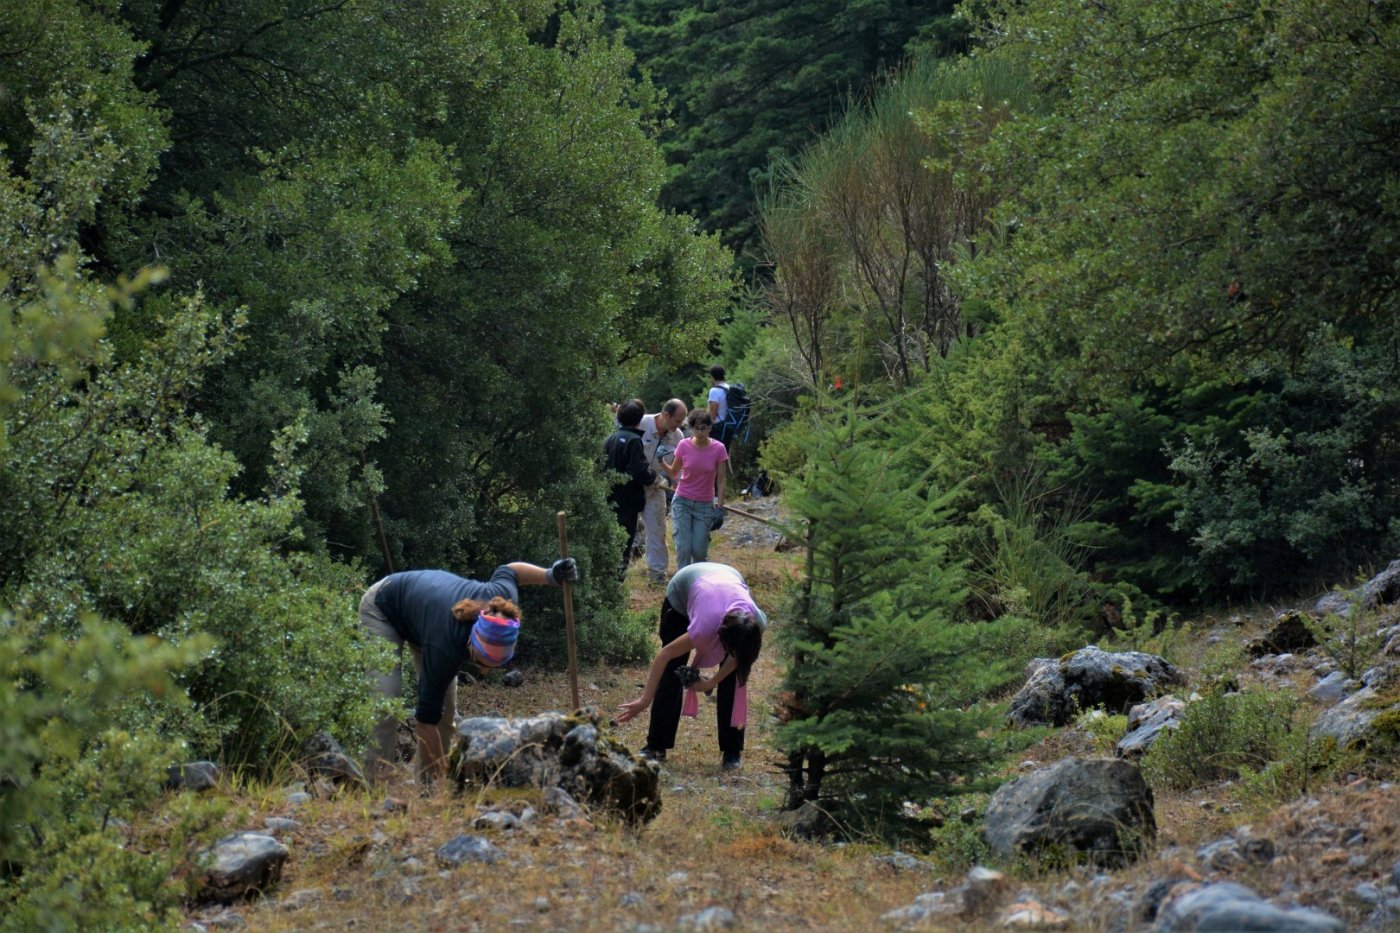 Giona mt / Start of a 2 months volunteering camp / Opening & digging the Pindus trail stitching paths